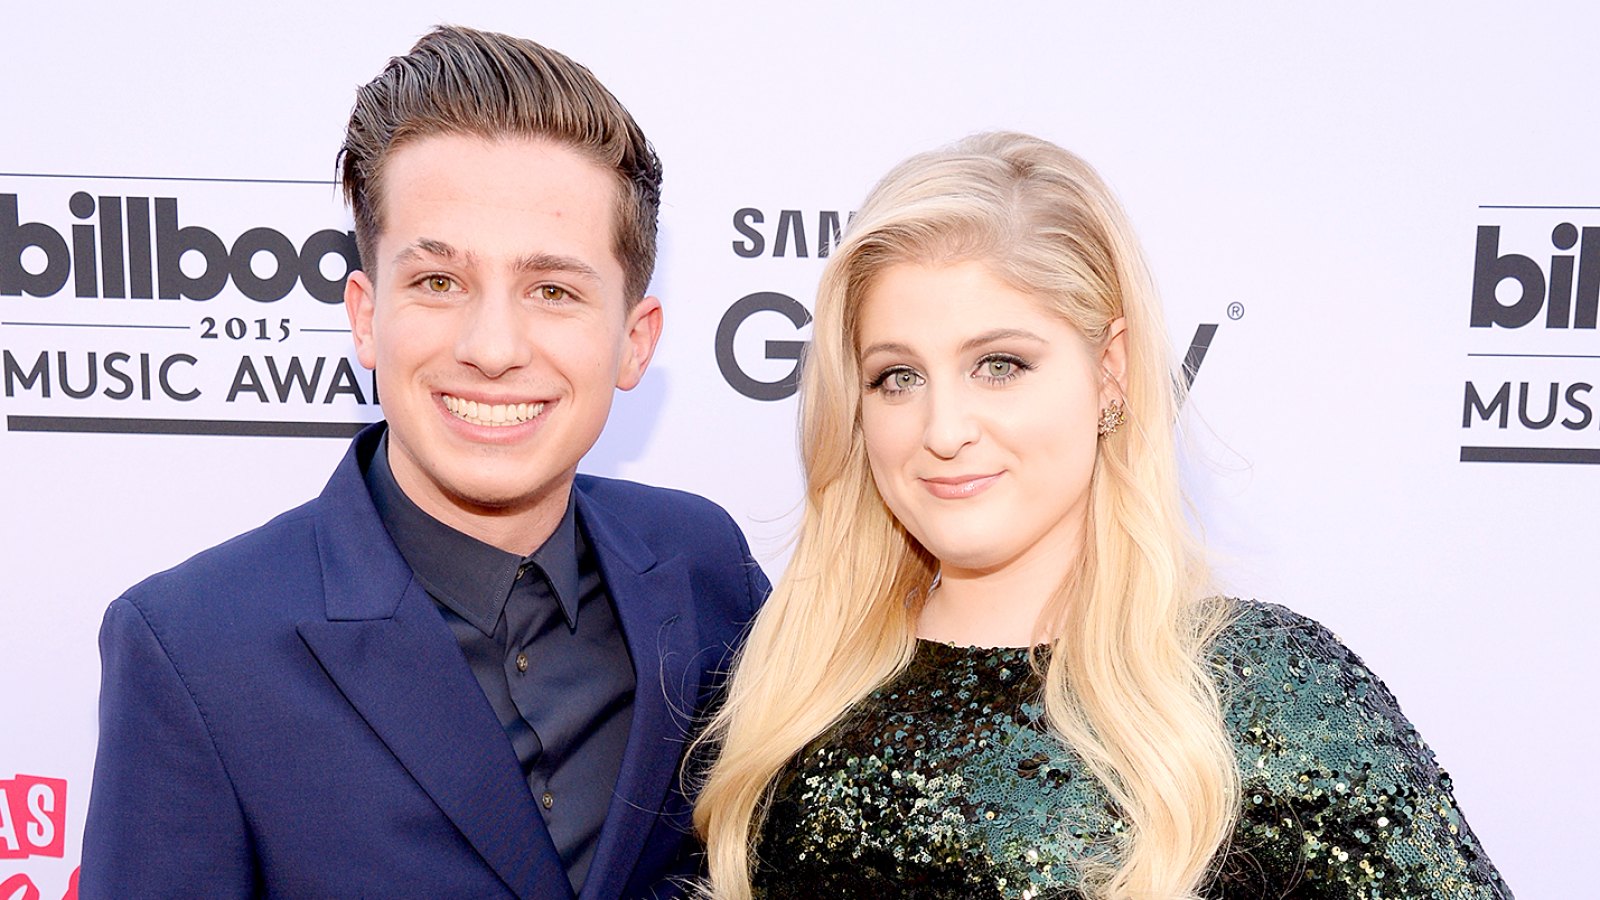 Meghan Trainor Had a 'Drunk Makeout' With Charlie Puth Before AMAs Kiss